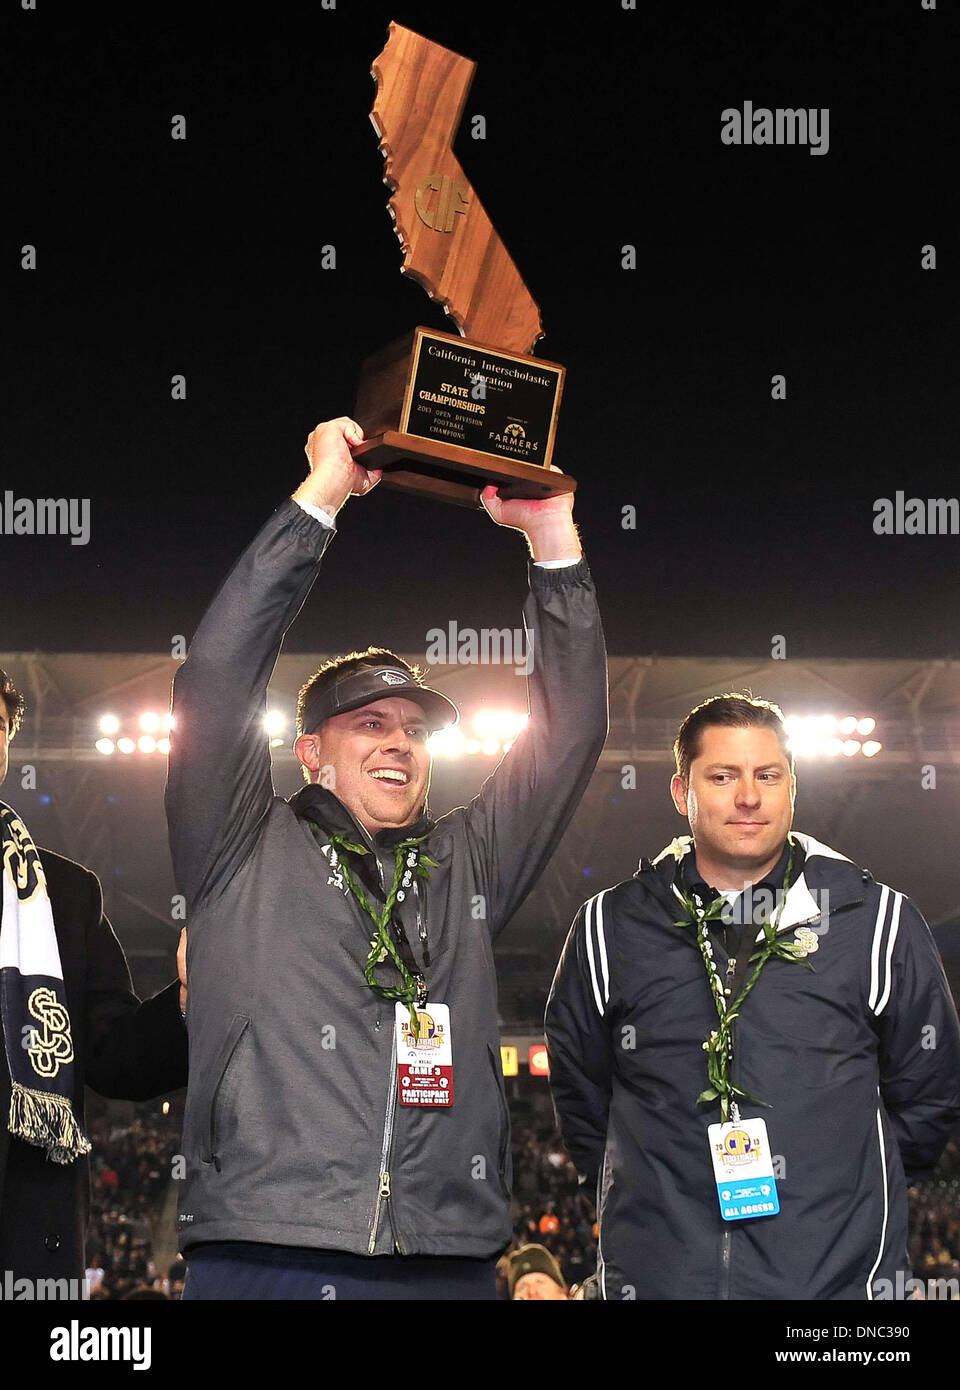 Carson, CA, . 21st Dec, 2013. Saint John Bosco Braves head coach Jason Negron hoists the Championship trophy after winning the CIF Open Division California State Football Championship football game between the Concord De La Salle Spartans and the Saint John Bosco Braves at the StubHub Center in Carson, California.The Saint John Bosco Braves defeat the Concord De La Salle Spartans 20-14.Louis Lopez/CSM/Alamy Live News Stock Photo